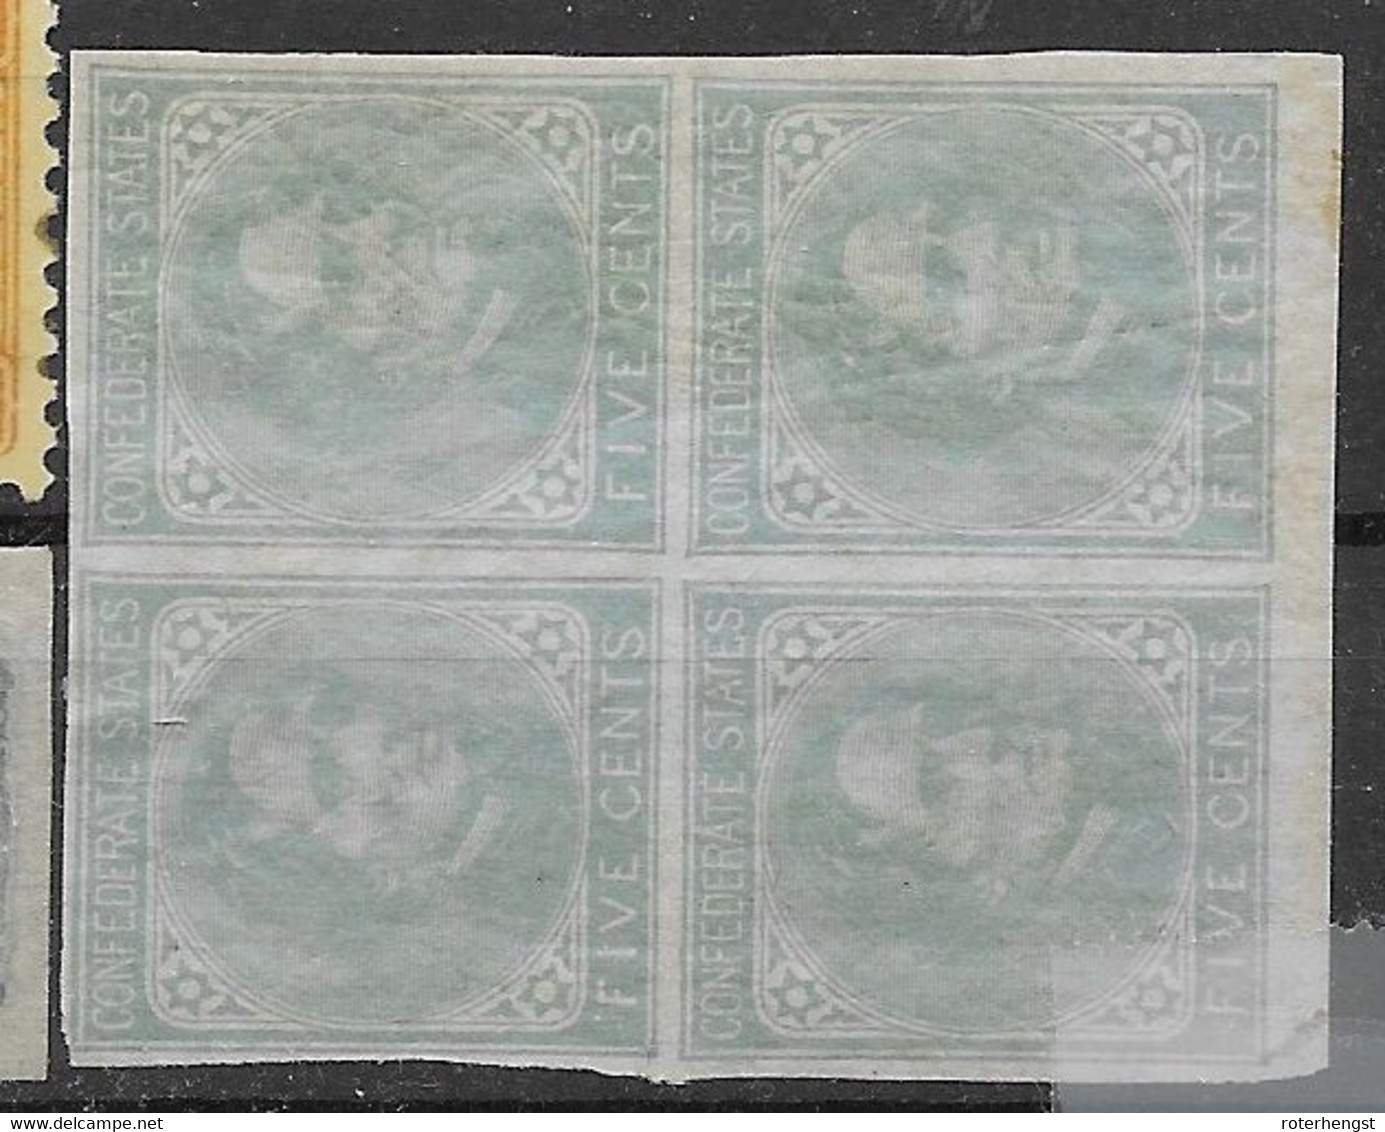 Confederate States Very Light Mint With Darkened Gum Mnh** (2 Stamps) And Mh* 1862 140 Euros (variety Very Thin Paper) - 1861-65 Stati Confederati